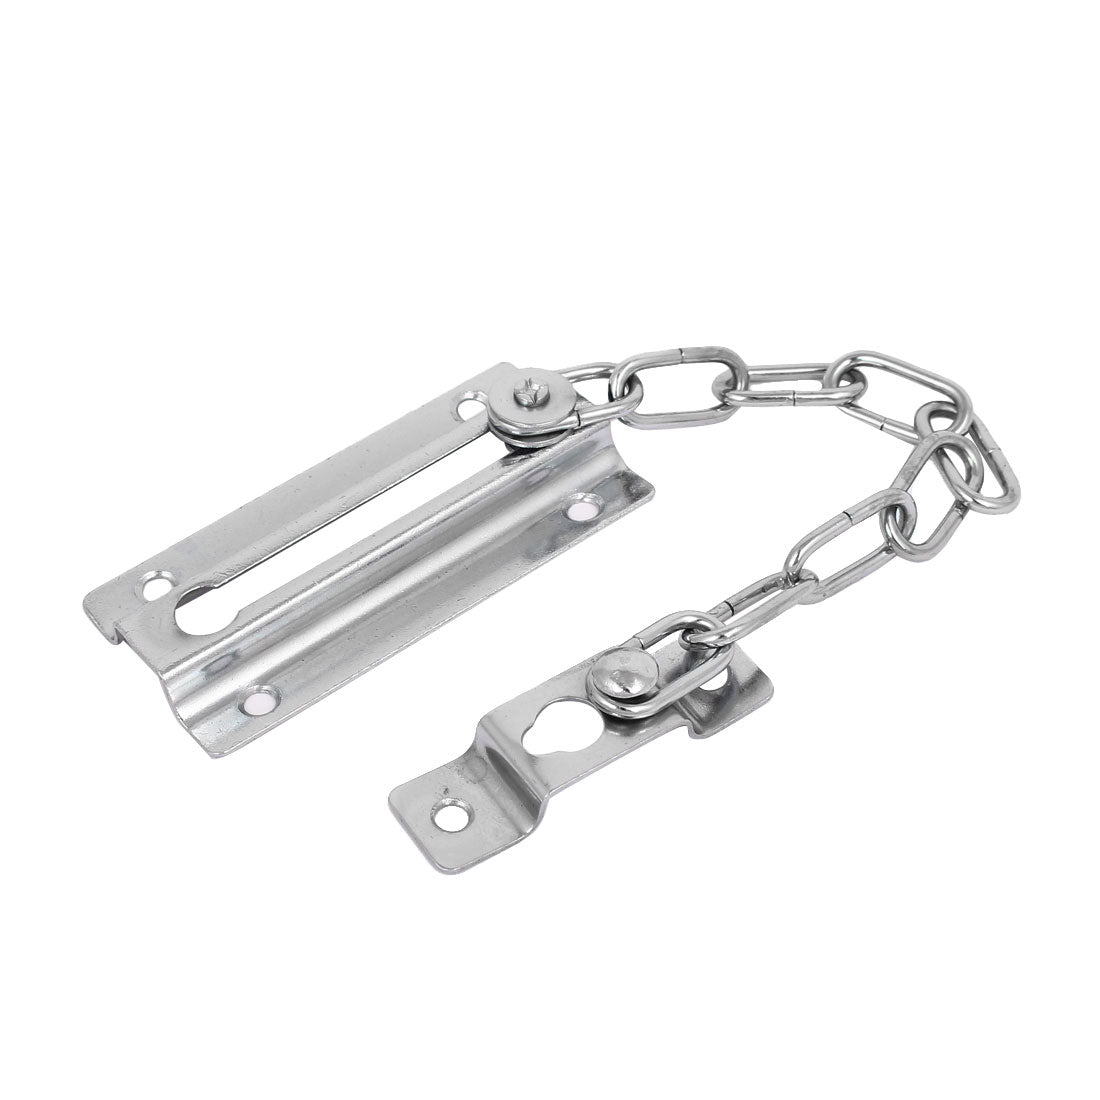 uxcell Uxcell Home Store Security Slide Bolt Door Chain Lock Silver Tone 260mm Length